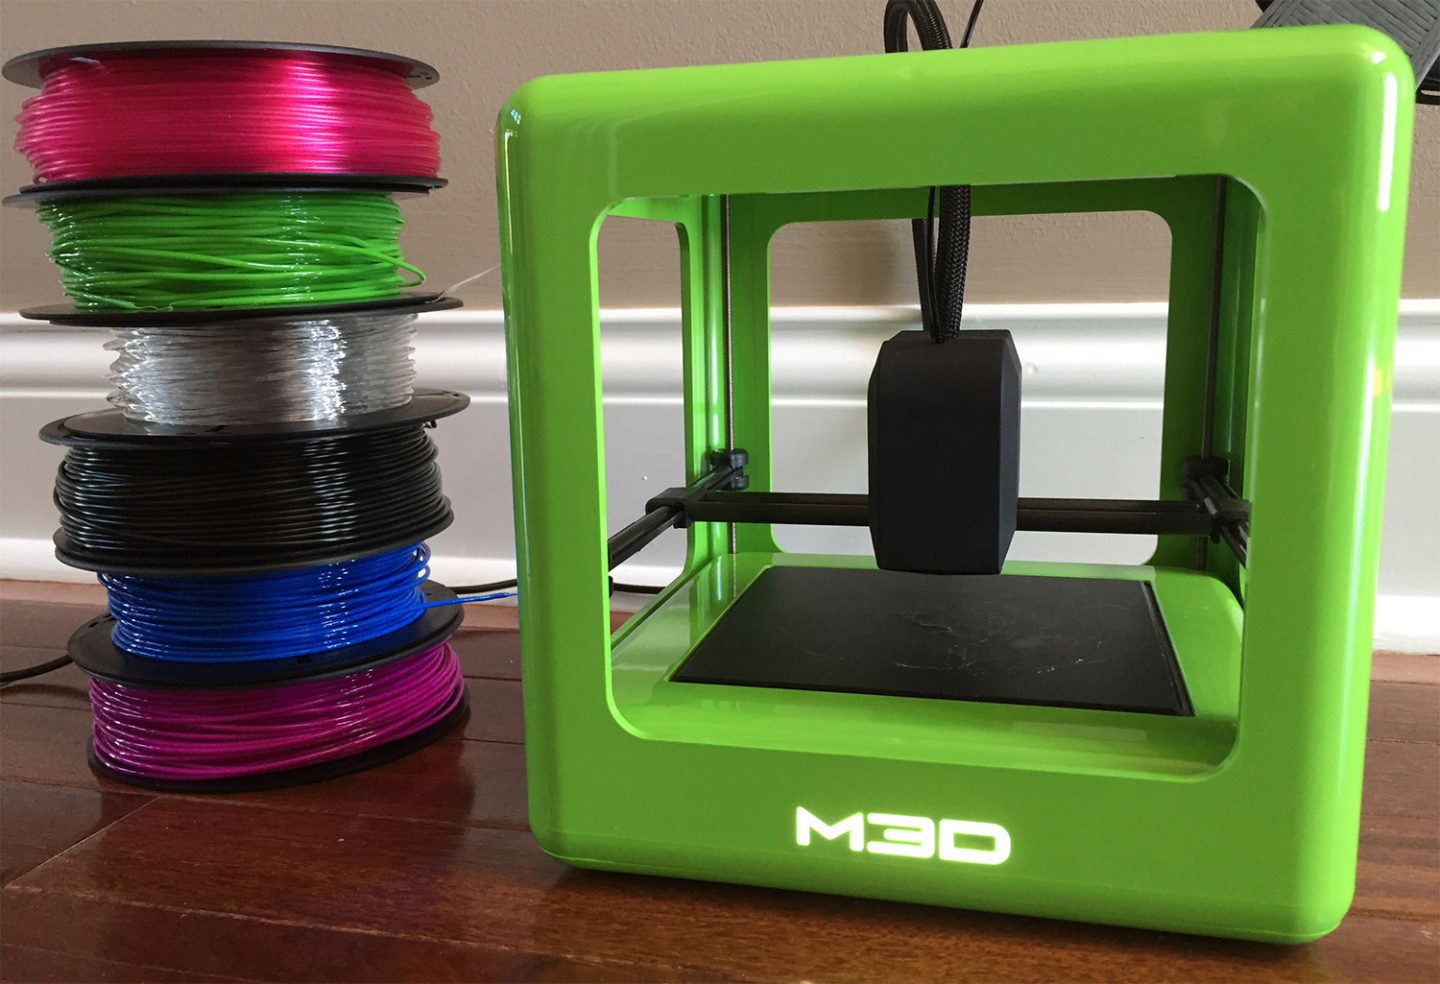 Geología maletero vértice REVIEW: M3D Micro 3D Printer - At Home in the Future